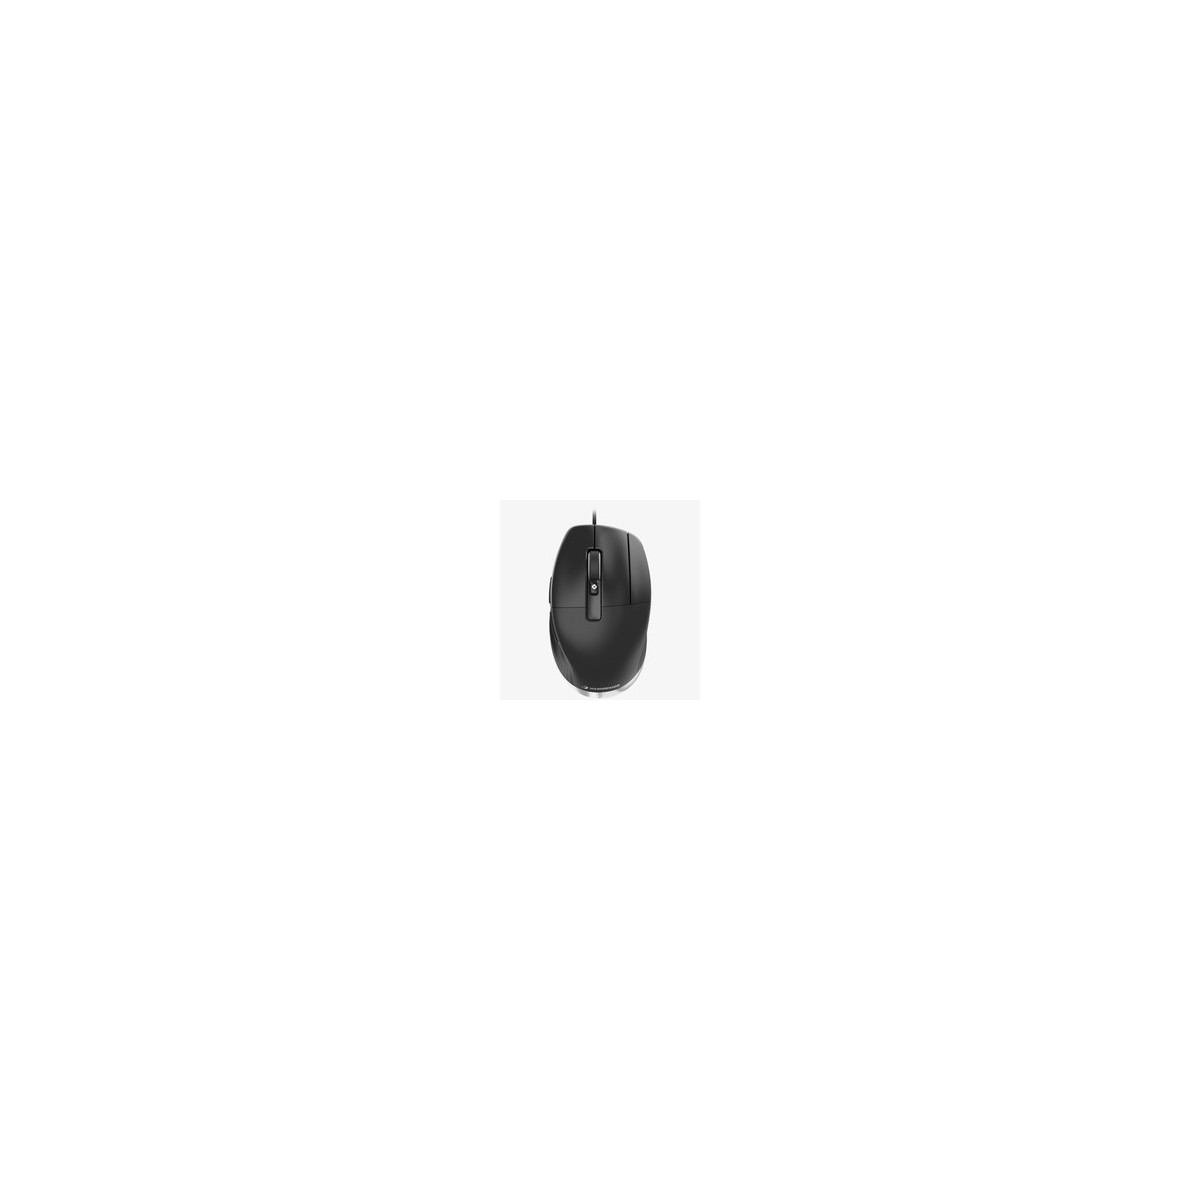 3Dconnexion CadMouse Pro - Right-hand - Optical - USB Type-A - Black